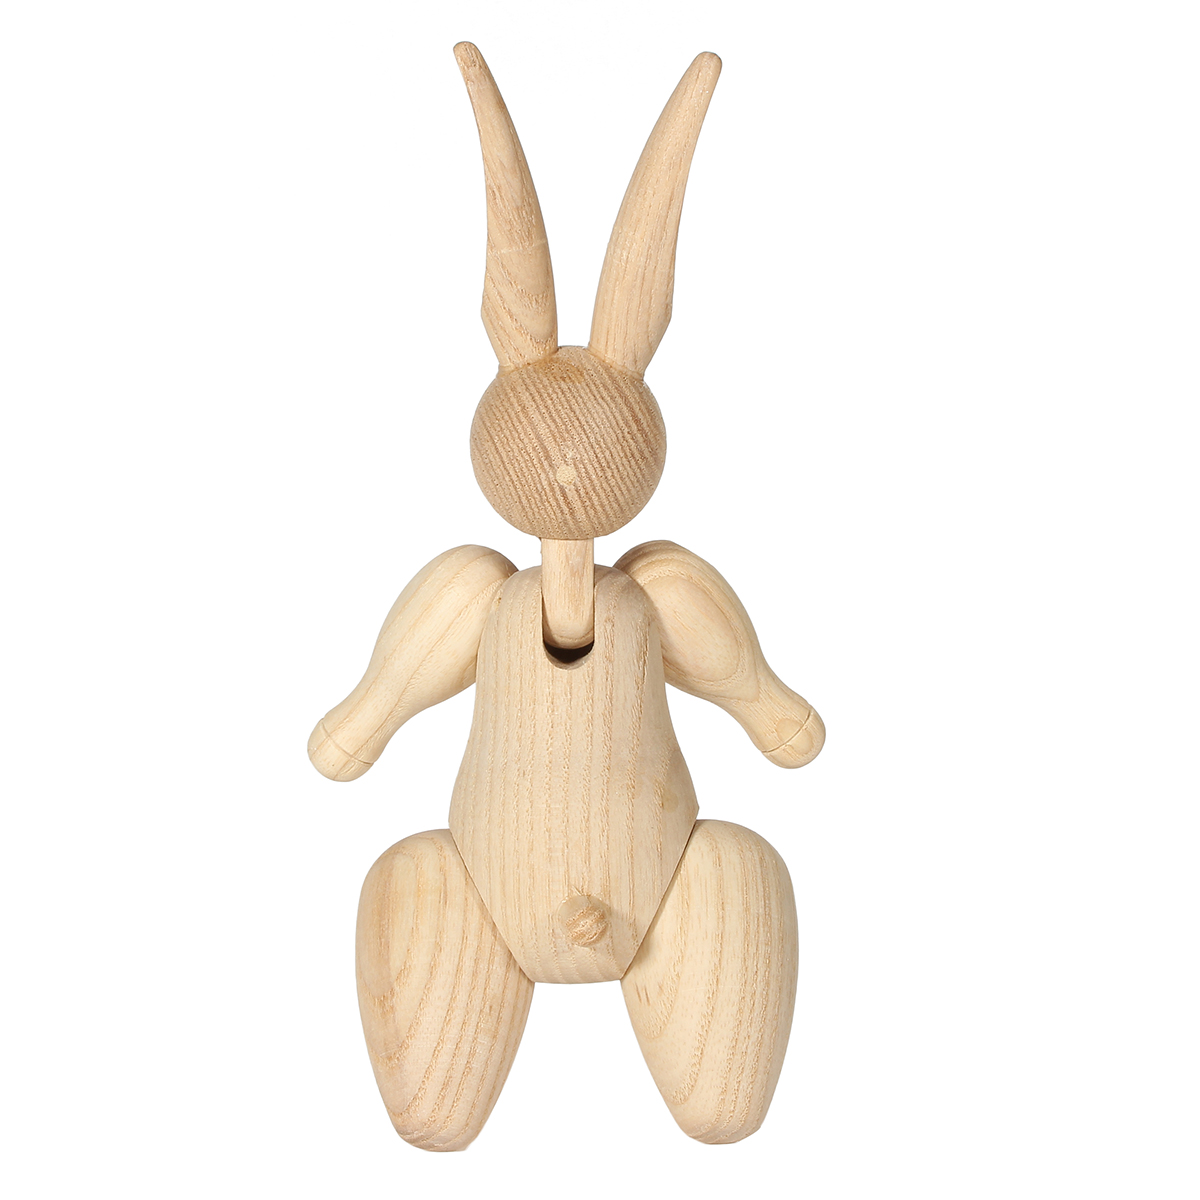 Wood-Carving-Miss-Rabbit-Figurines-Joints-Puppets-Animal-Art-Home-Decoration-Crafts-1241724-3